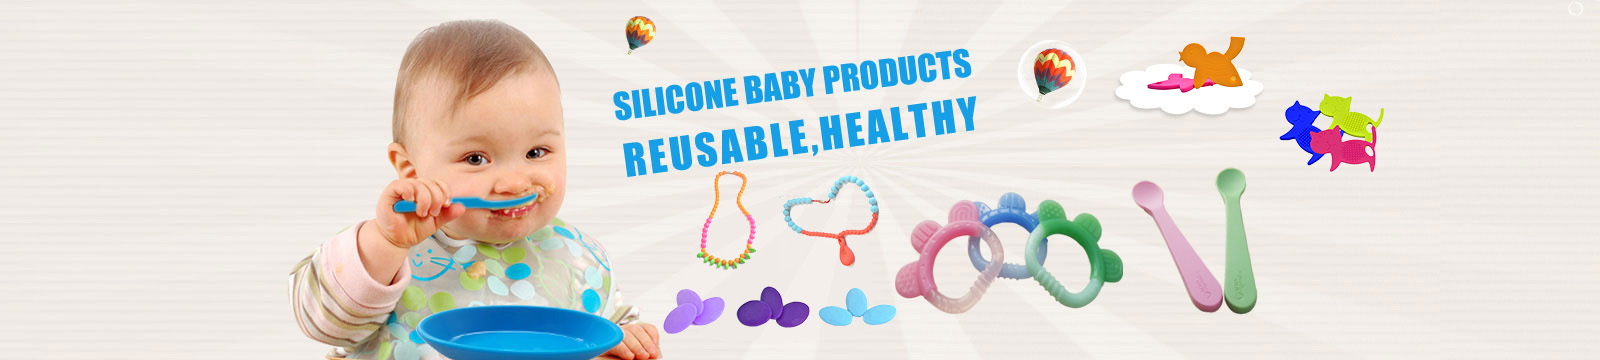 Silicone-Baby-Products